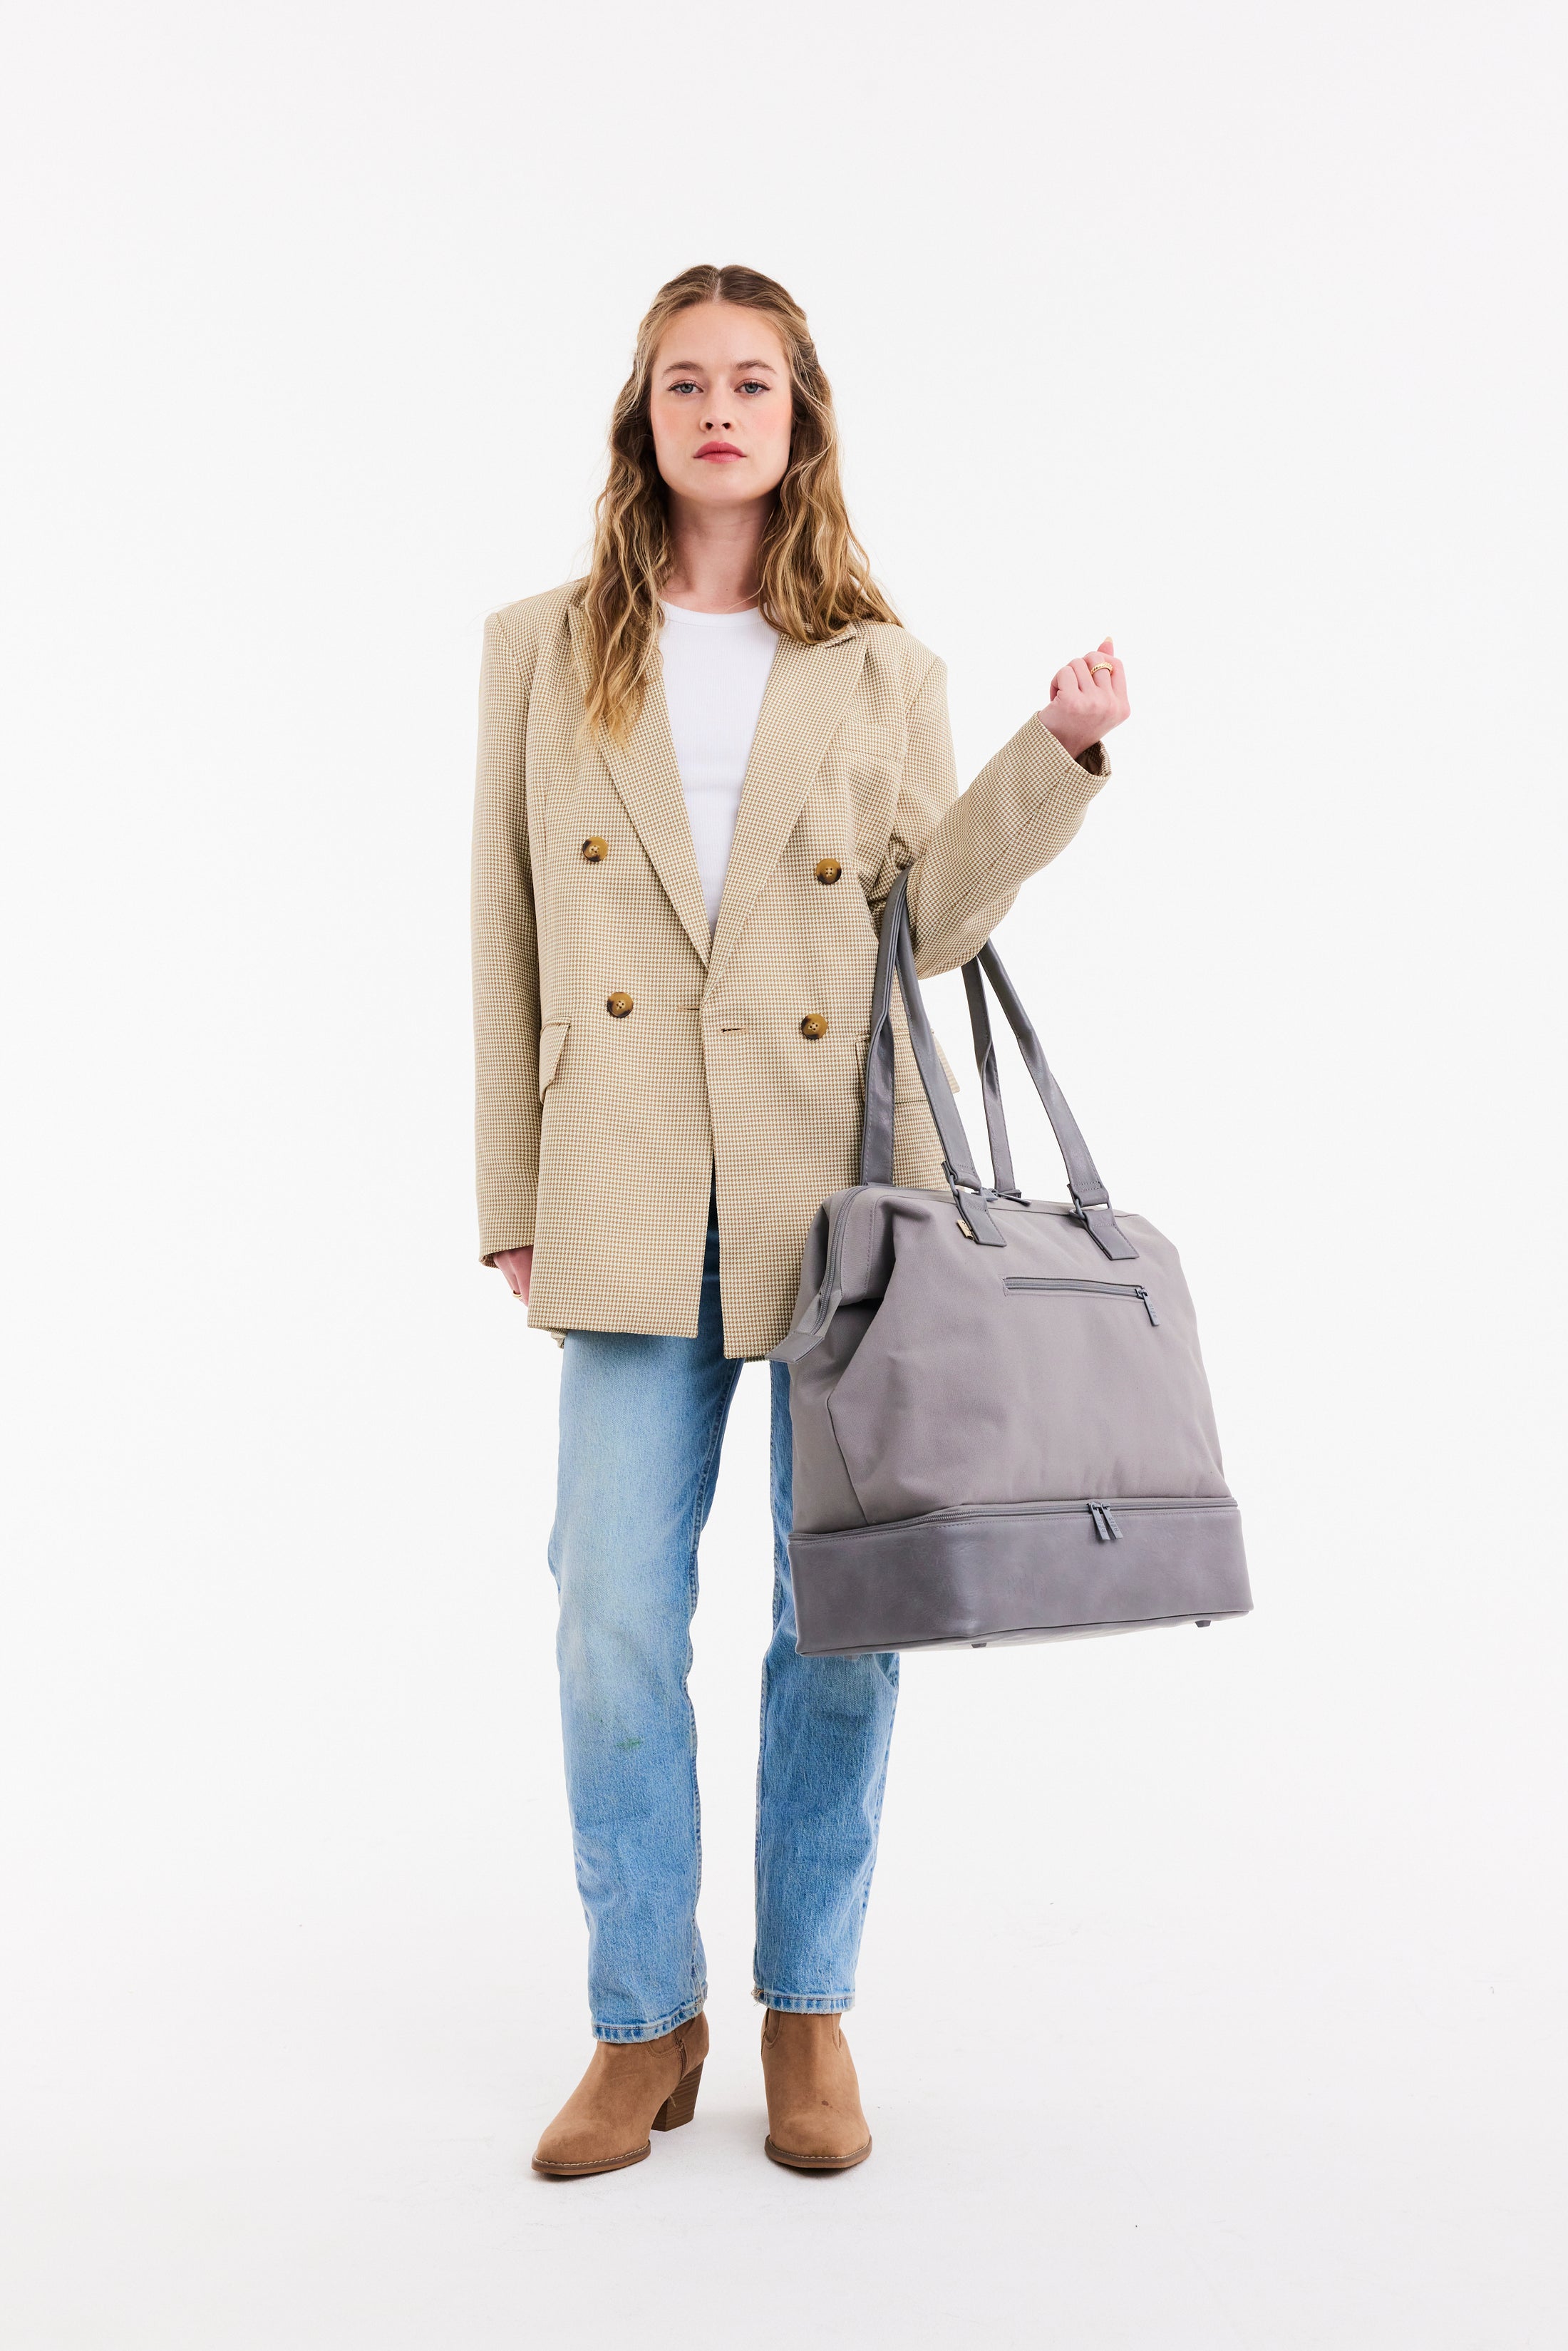 BÉIS 'The Mini Weekender' in Grey - Small Grey Travel Bag & Small ...